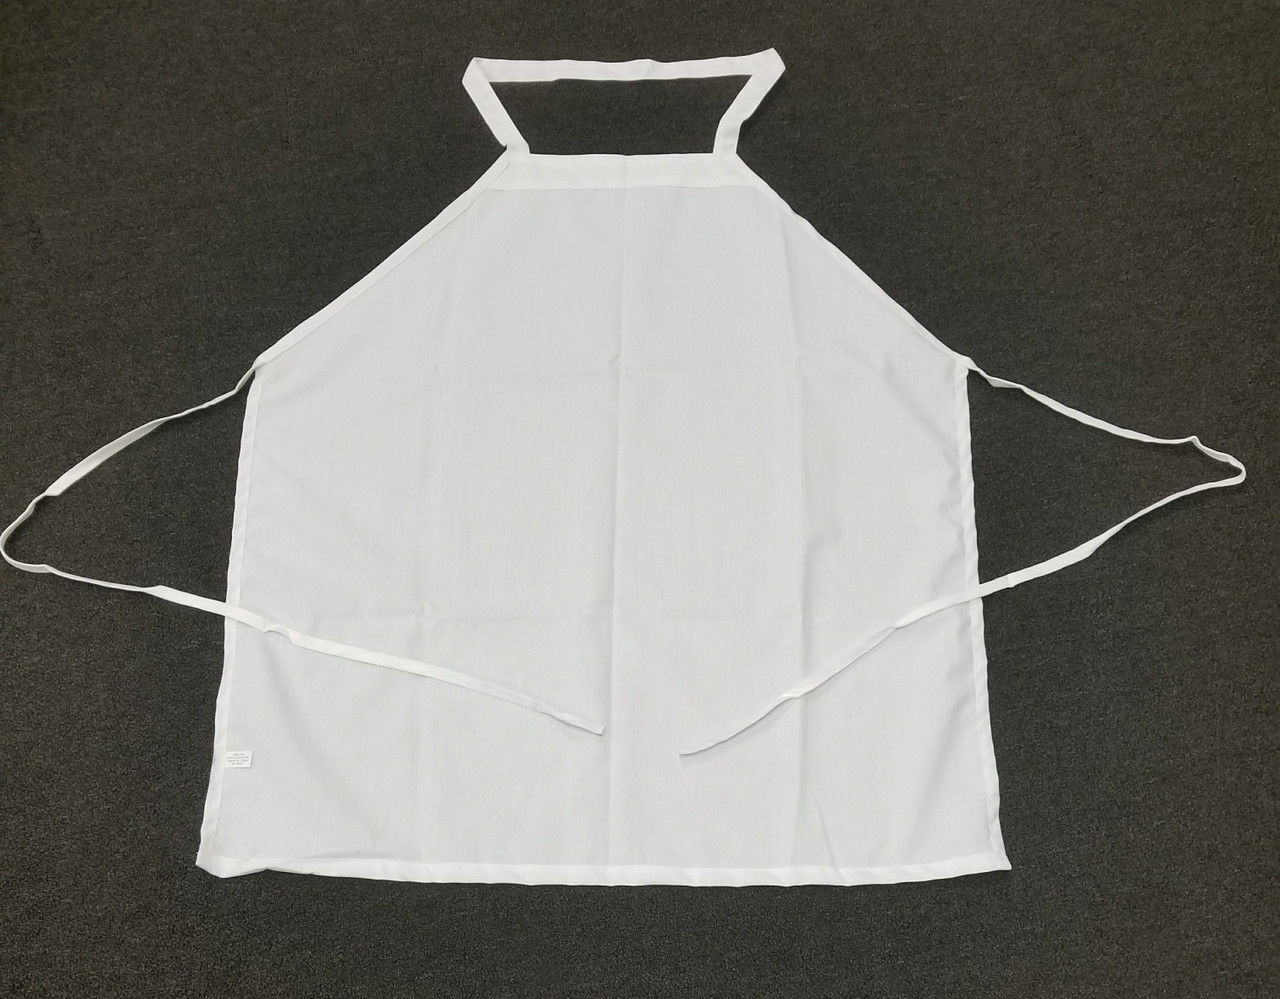 Is the material heavy for these white aprons with pockets?